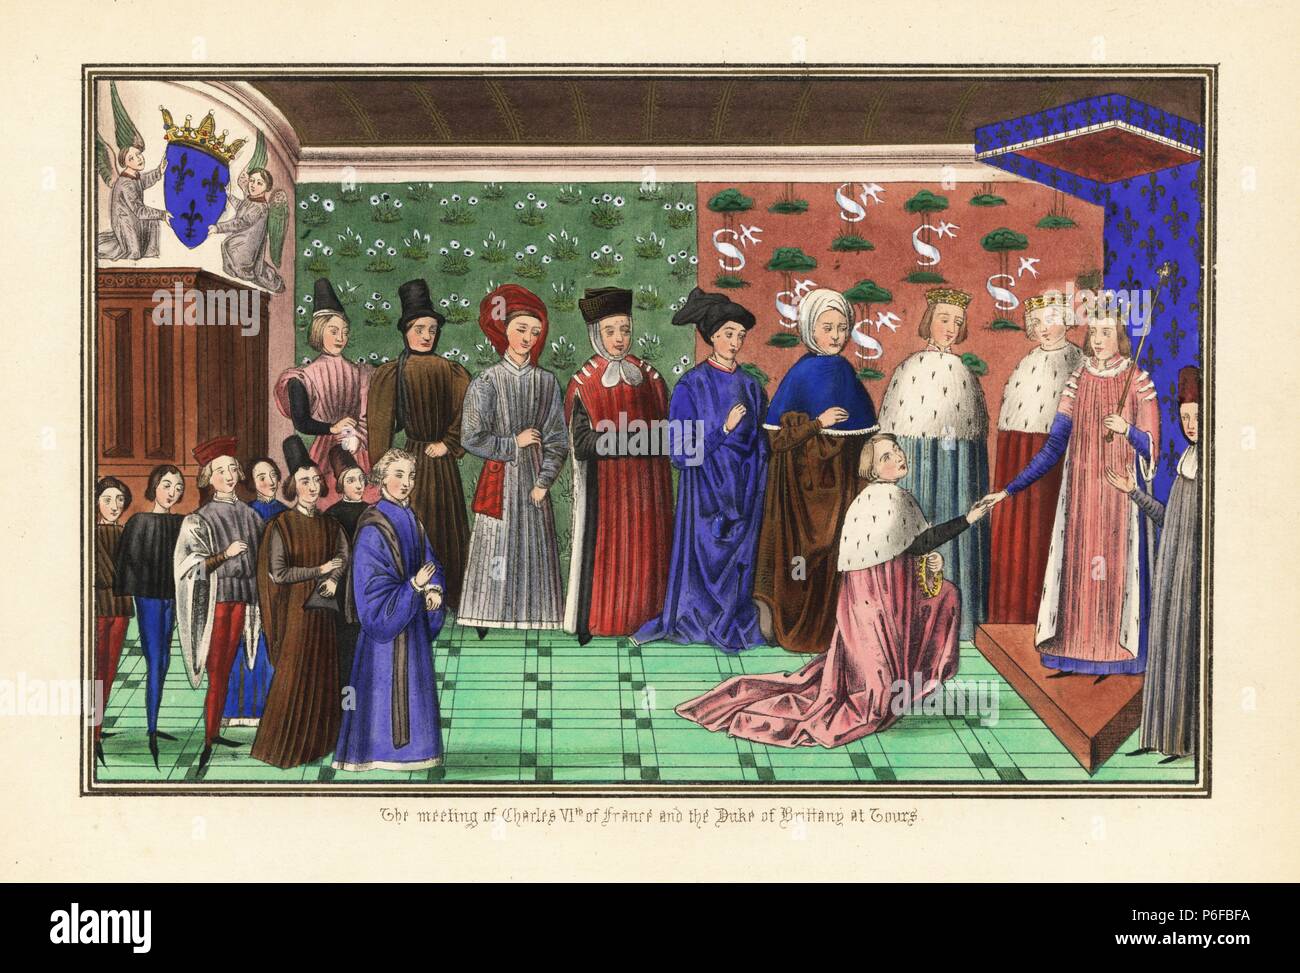 The meeting of King Charles VI of France and John VI, Duke of Brittany, at Tours, c.1396. Handcoloured lithograph after an illuminated manuscript from Sir John Froissart's 'Chronicles of England, France, Spain and the Adjoining Countries, from the Latter Part of the Reign of Edward II to the Coronation of Henry IV,' George Routledge, London, 1868. Stock Photo